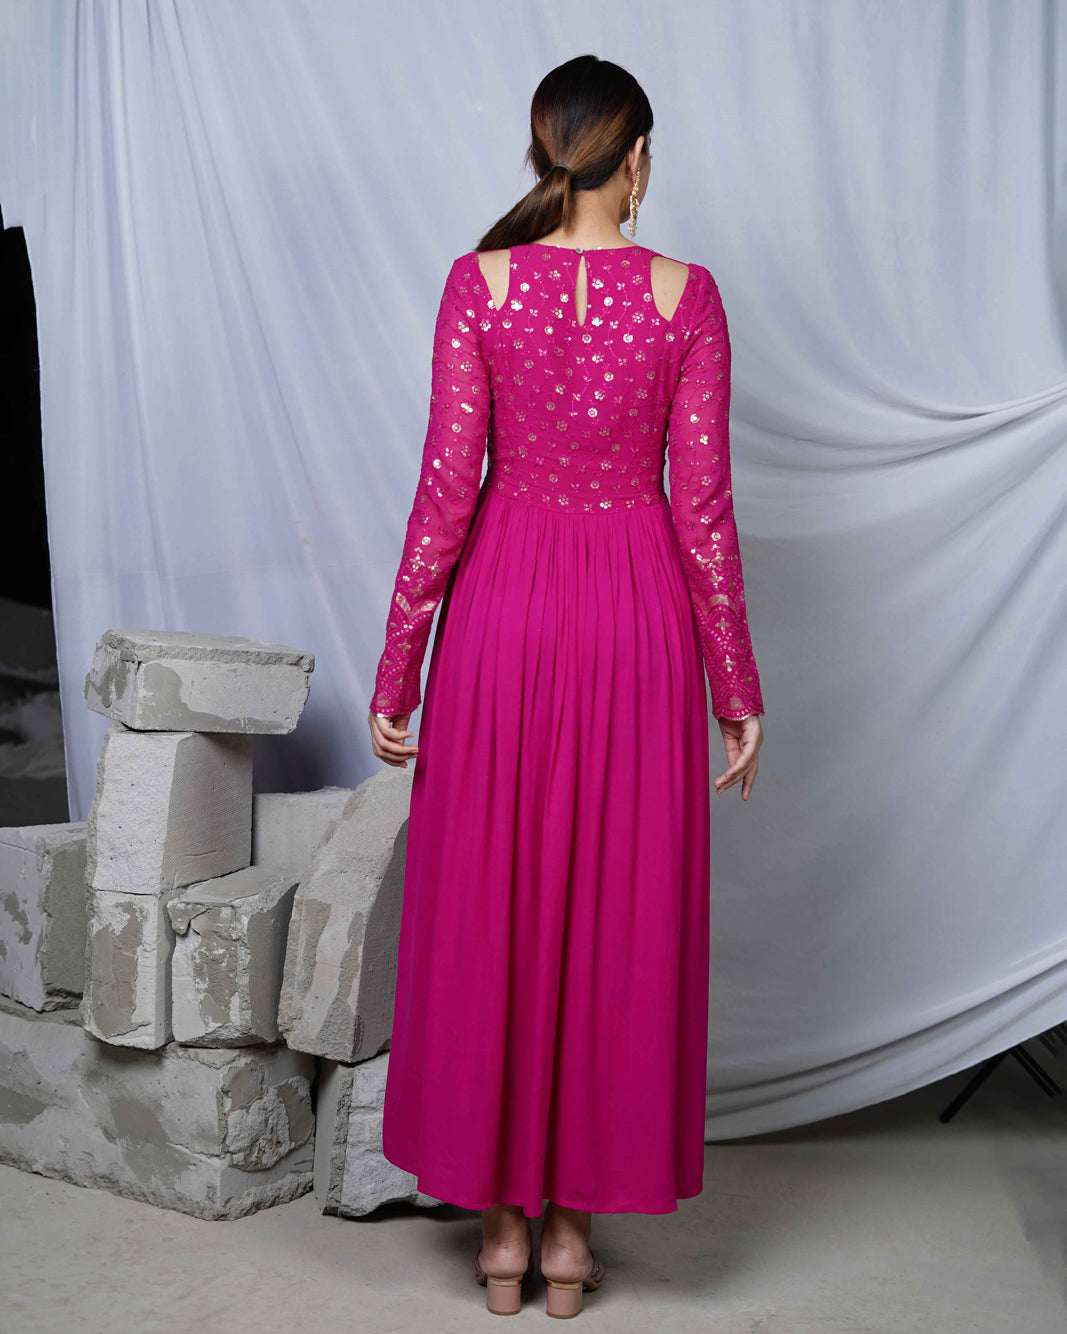 Razia Hot Pink Indo- Western Womens Party Maxi Dress with Embroidery and Cut Out Details for Cocktail